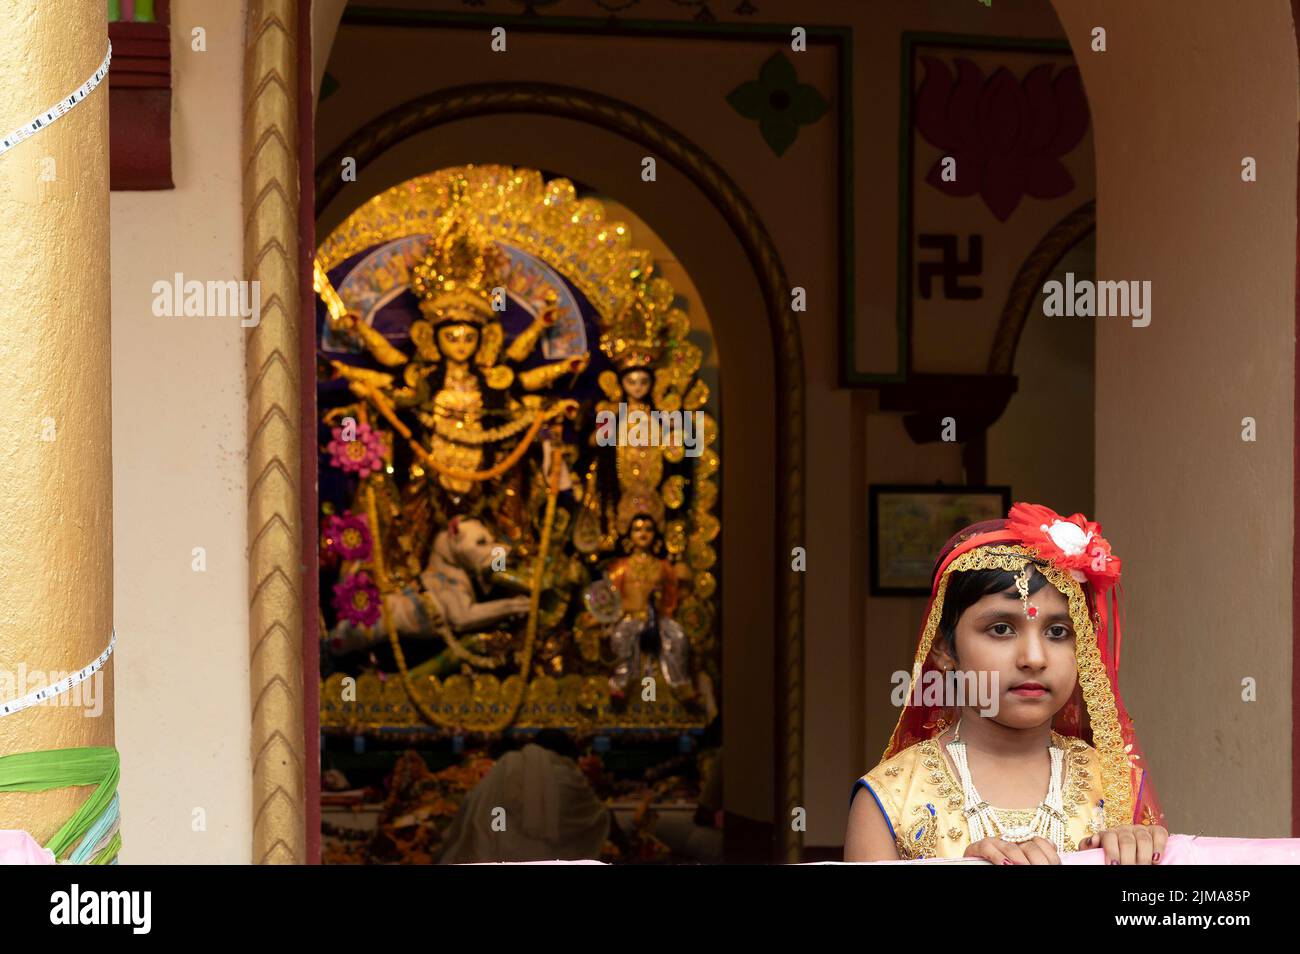 Howrah,India -October 26th,2020 : Bengali girl child in festive dress, smiling and posing with Goddess Durga in background, inside old age decorated h Stock Photo